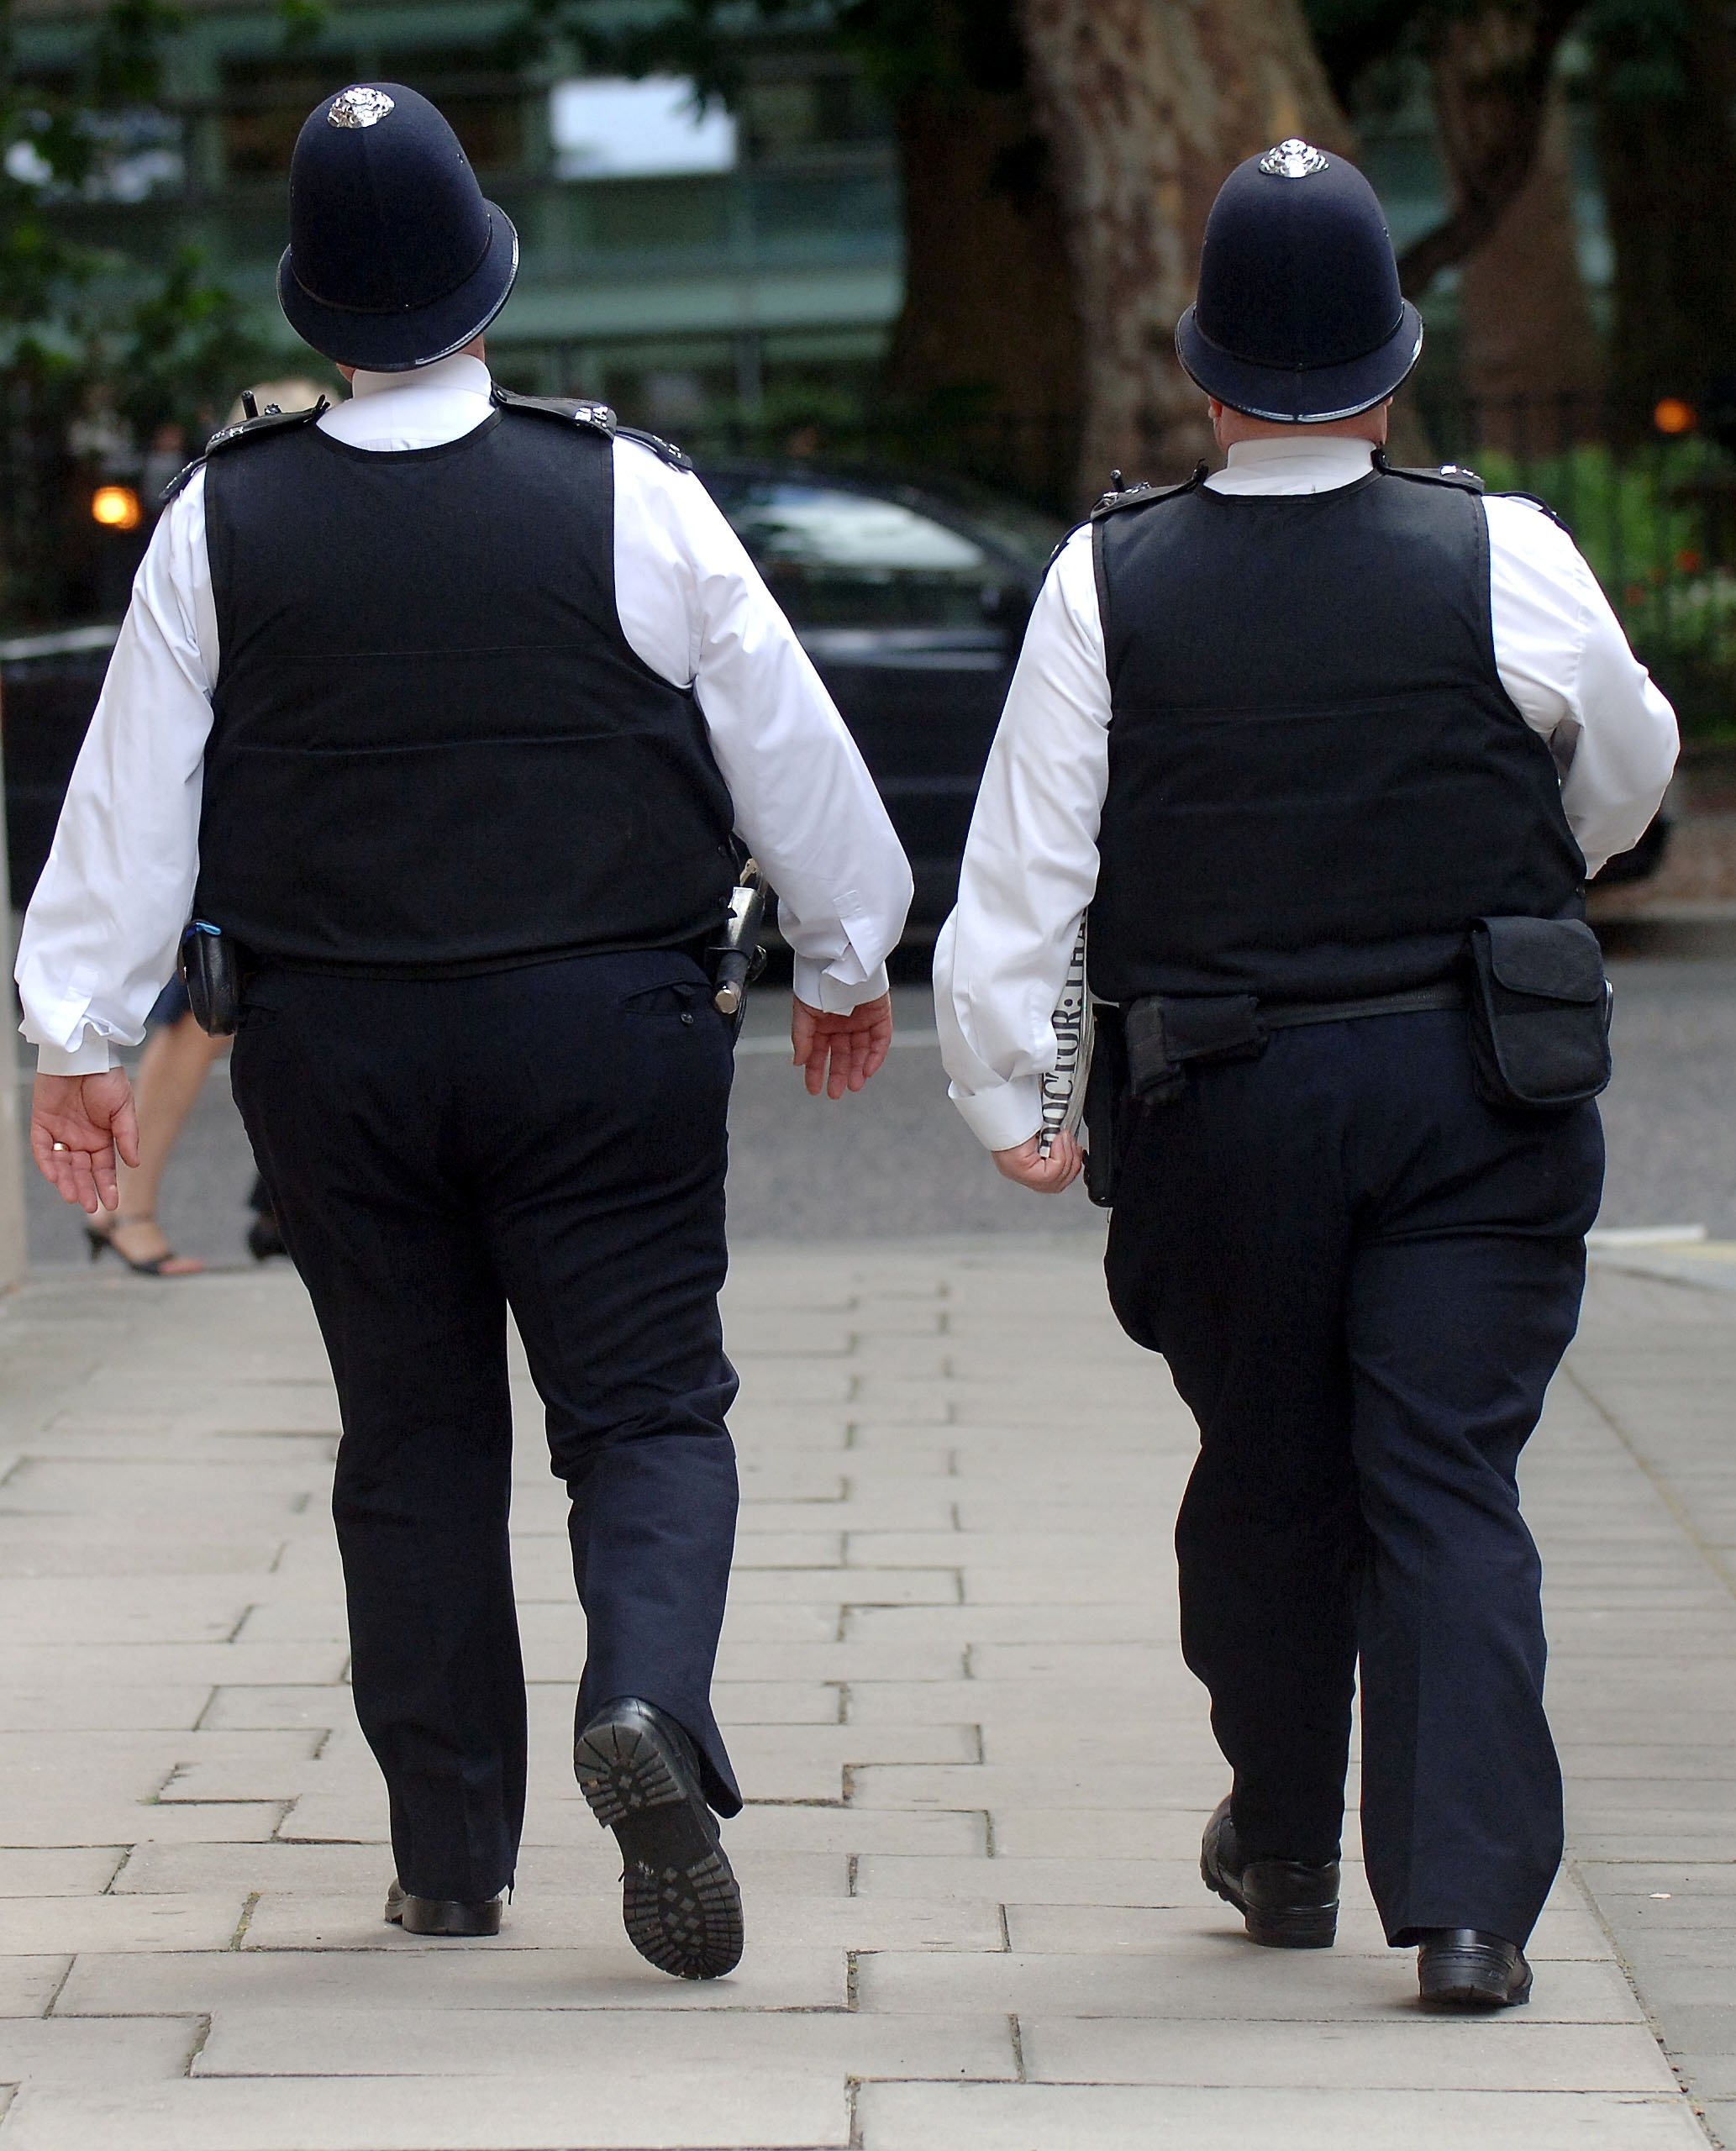 Fury as more than 1,000 cops failed fitness tests in last year raising questions over their ability to protect public